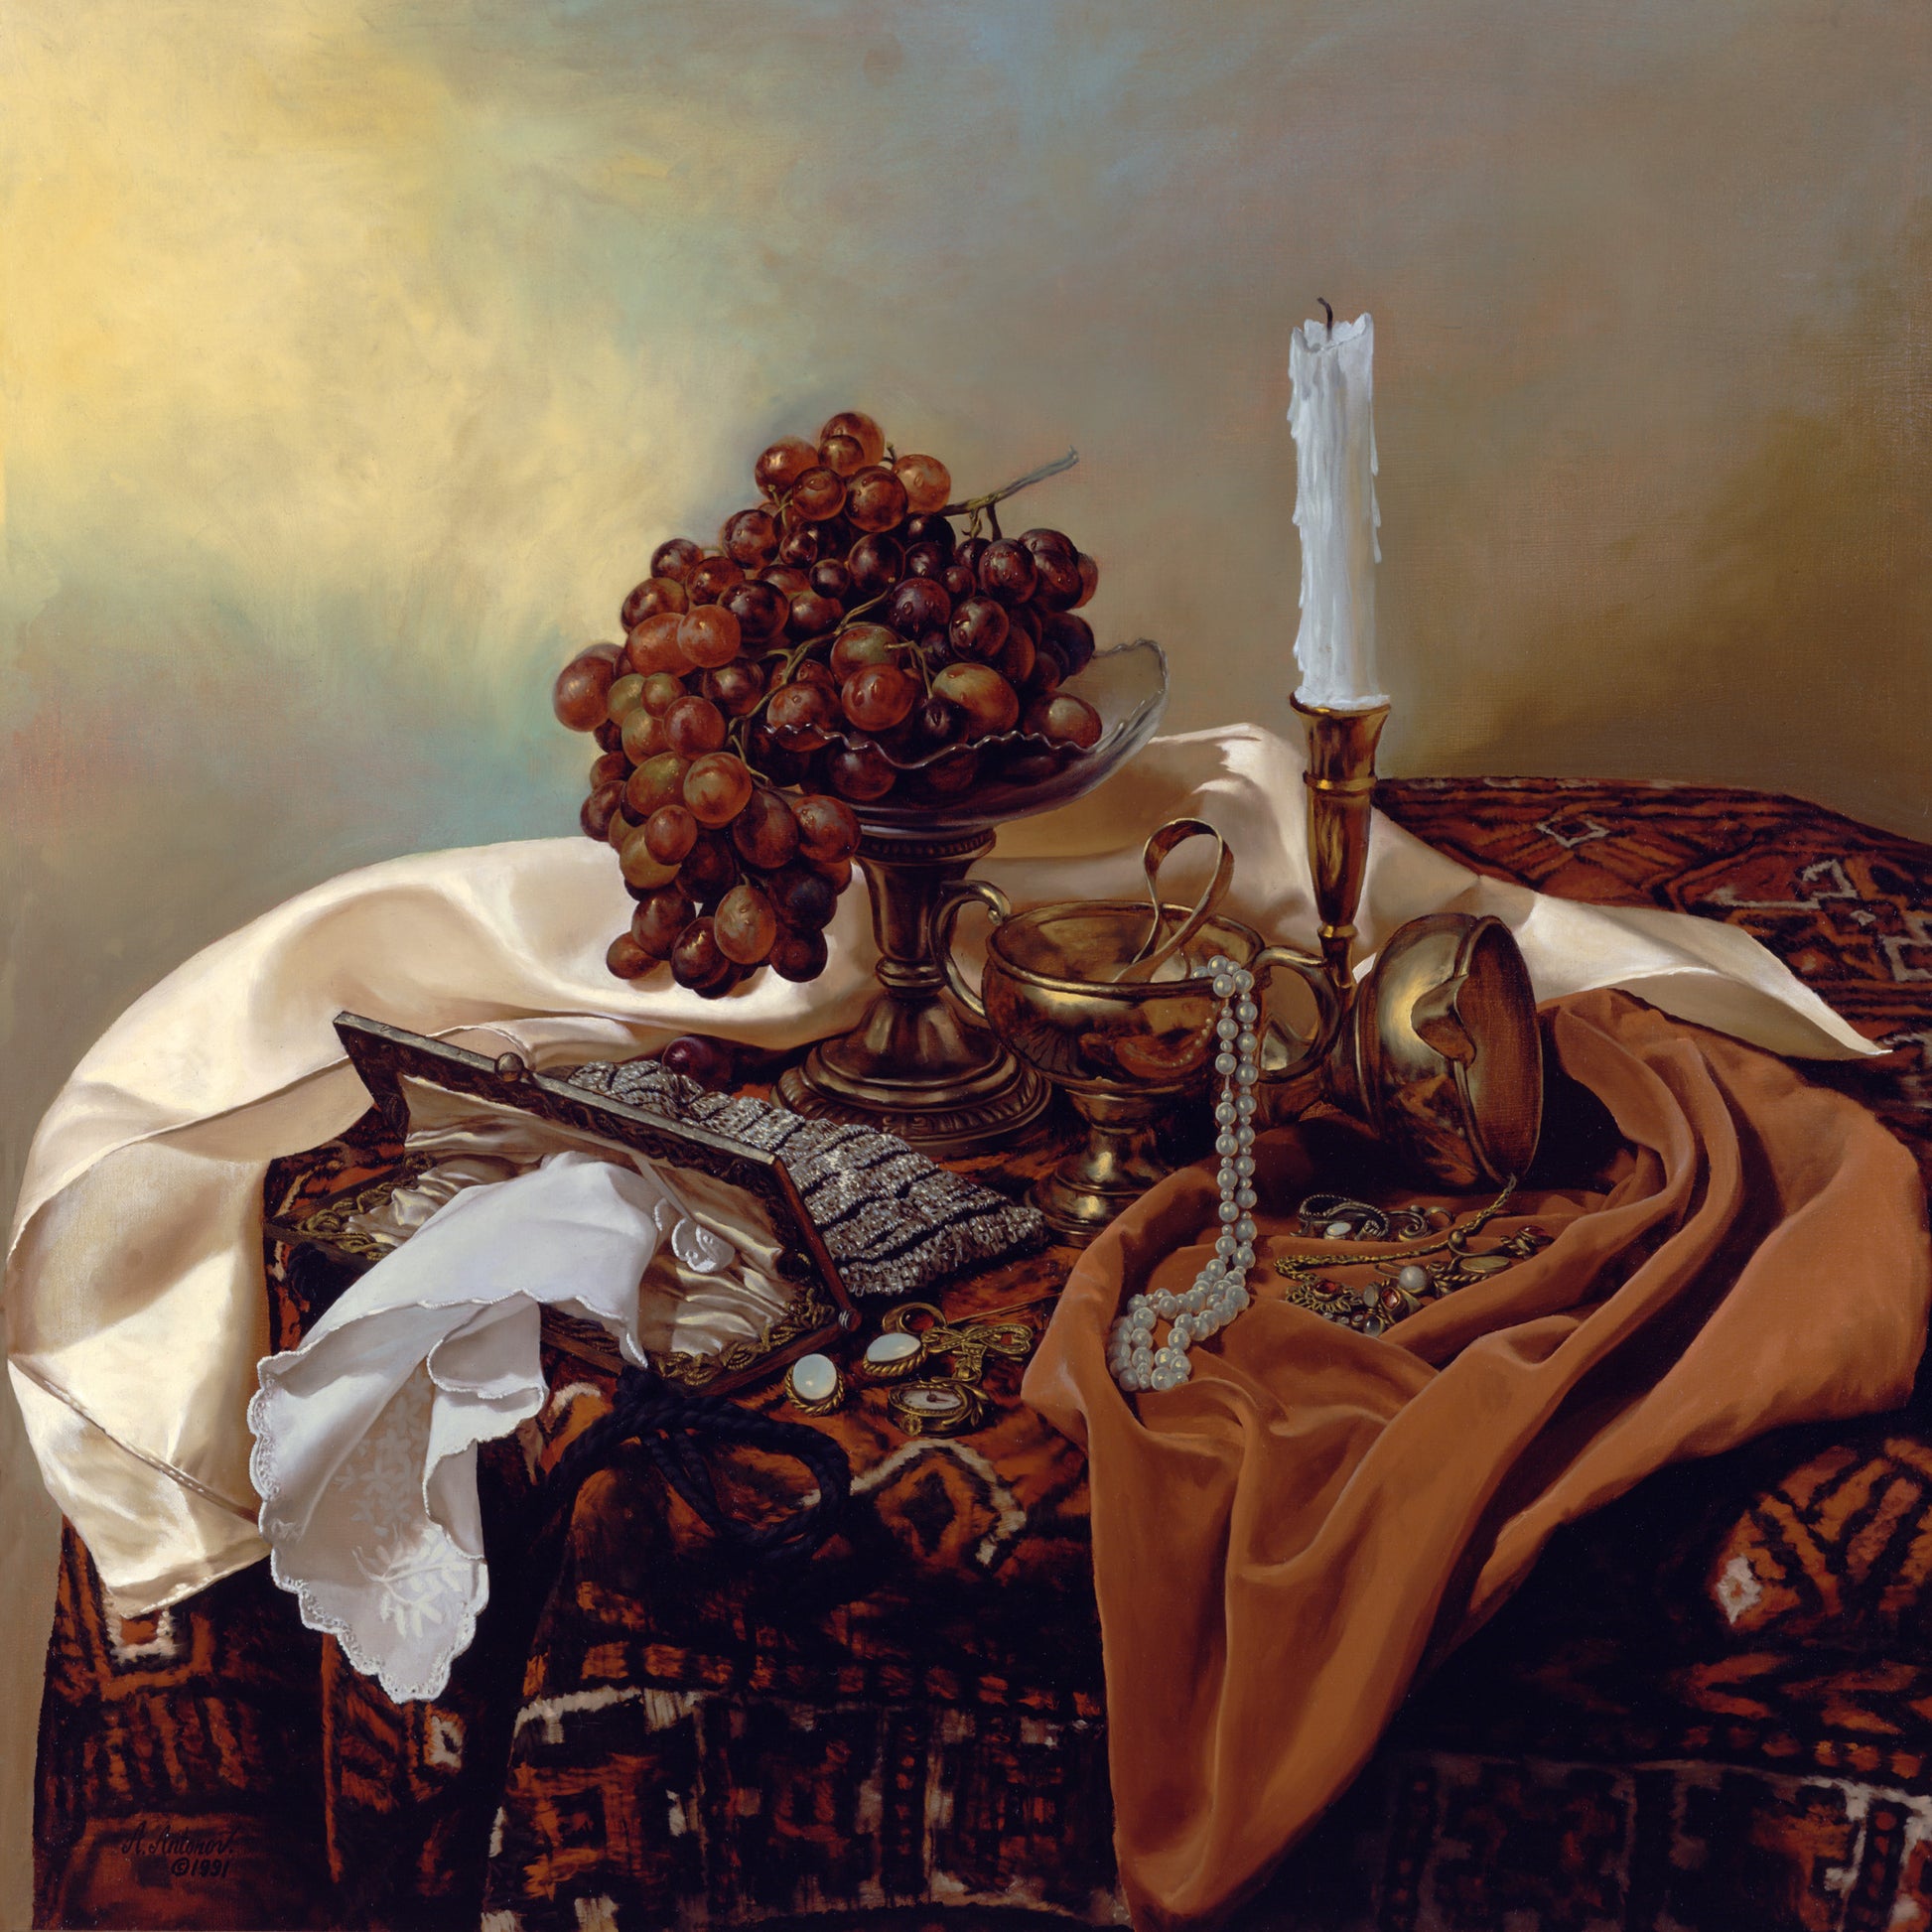 a painting of a table that has grapes, candles and a bowl of grapes, in the style of detailed drapery, light bronze and amber, olympus pen f, hudson river school, dau al set, graceful balance, jewish culture themes